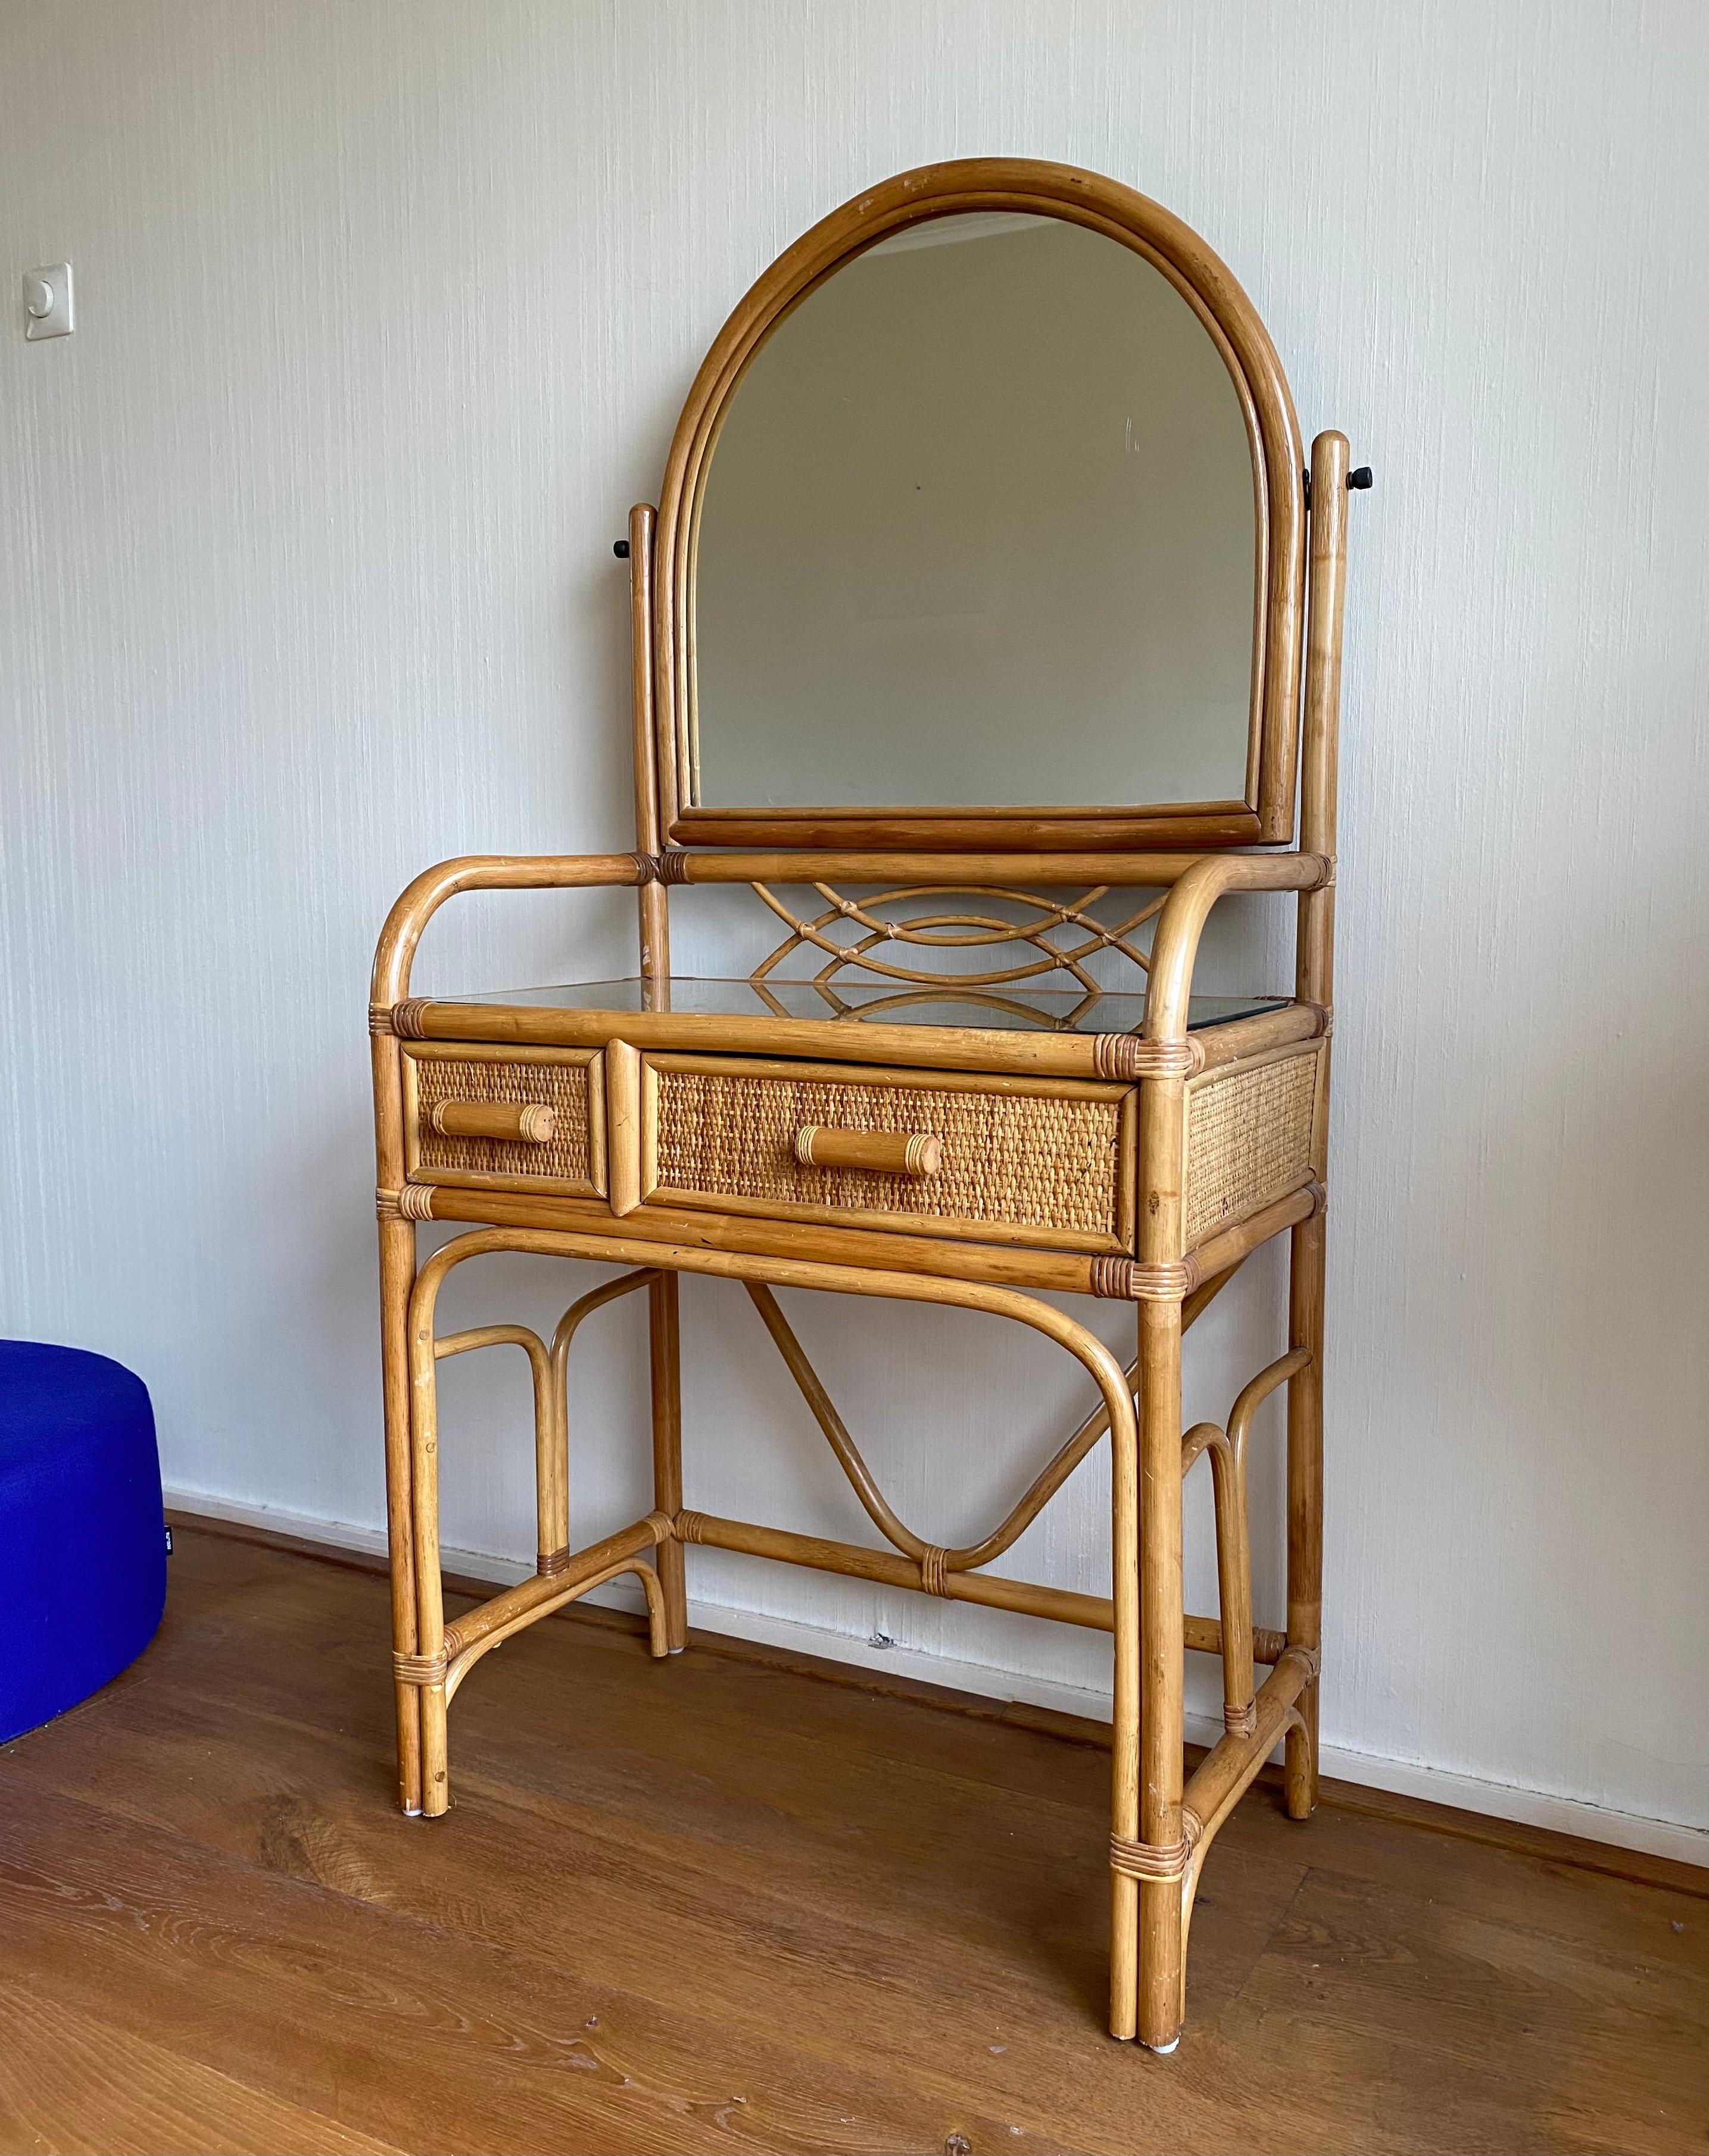 Super Cute Rattan Vanity Set From the late 20th century, consisting of a table with drawer and mirror and a stool. This European set fits well in a midcentury or Bohemian style home. Also some little princesses might like it in their room.
The set